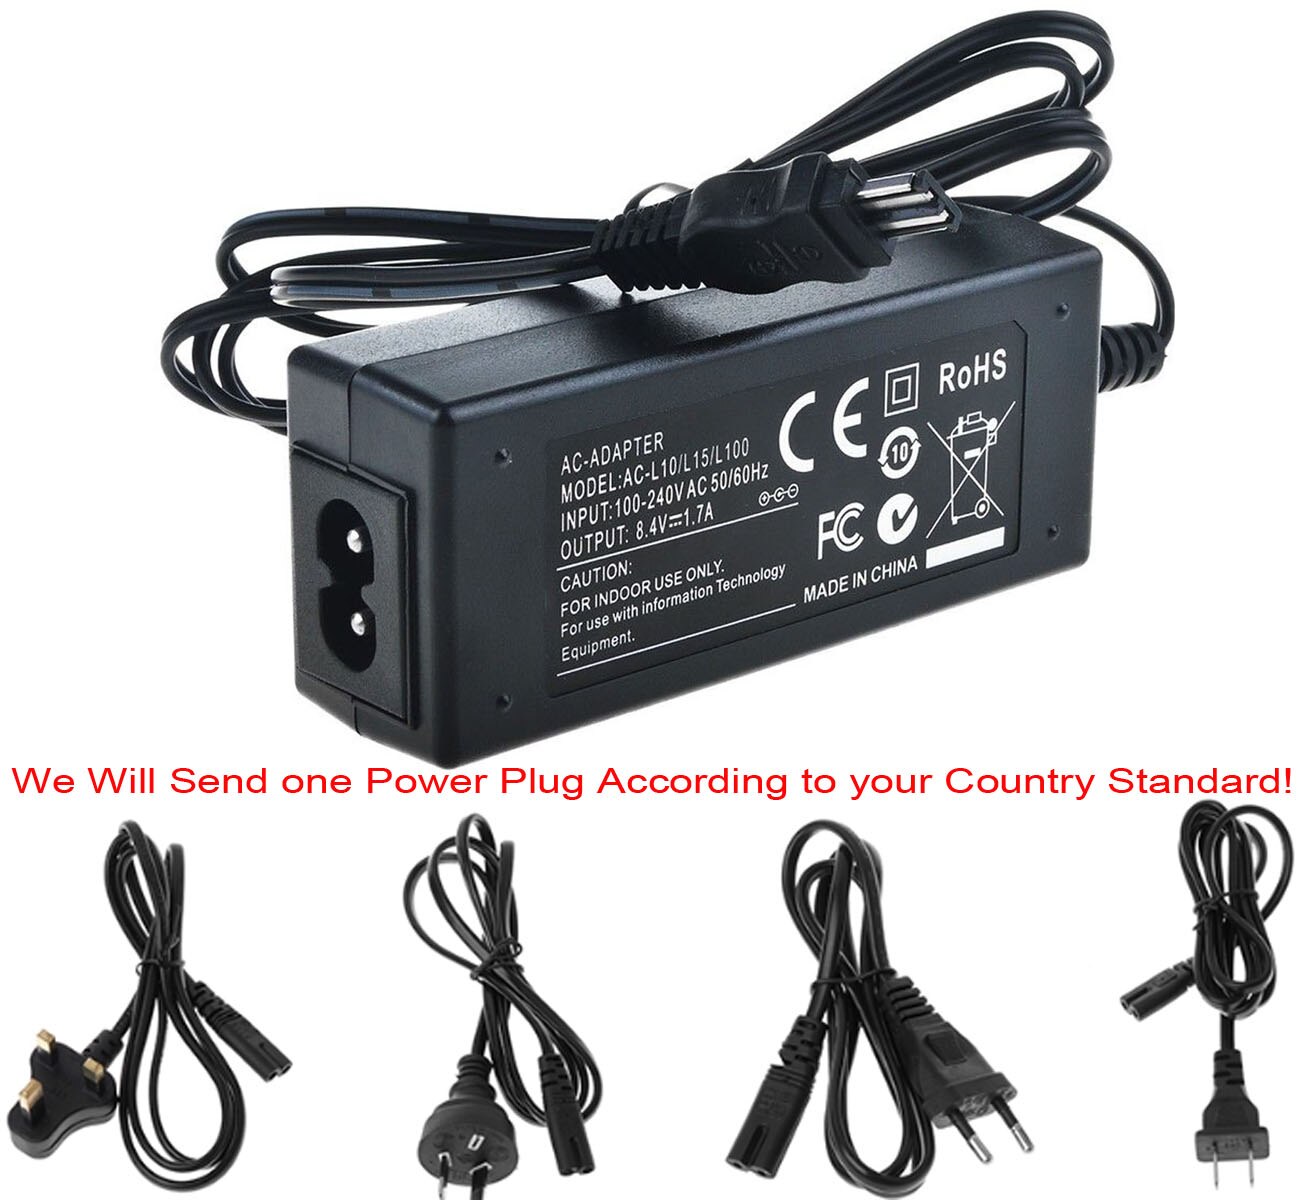 Ac Power Adapter Oplader Voor Sony DCR-TRV310E, DCR-TRV410E, DCR-TRV420E, DCR-TRV430E, DCR-TRV460E, DCR-TRV480E Handycam Camcorder: 1x AC Power Adapter